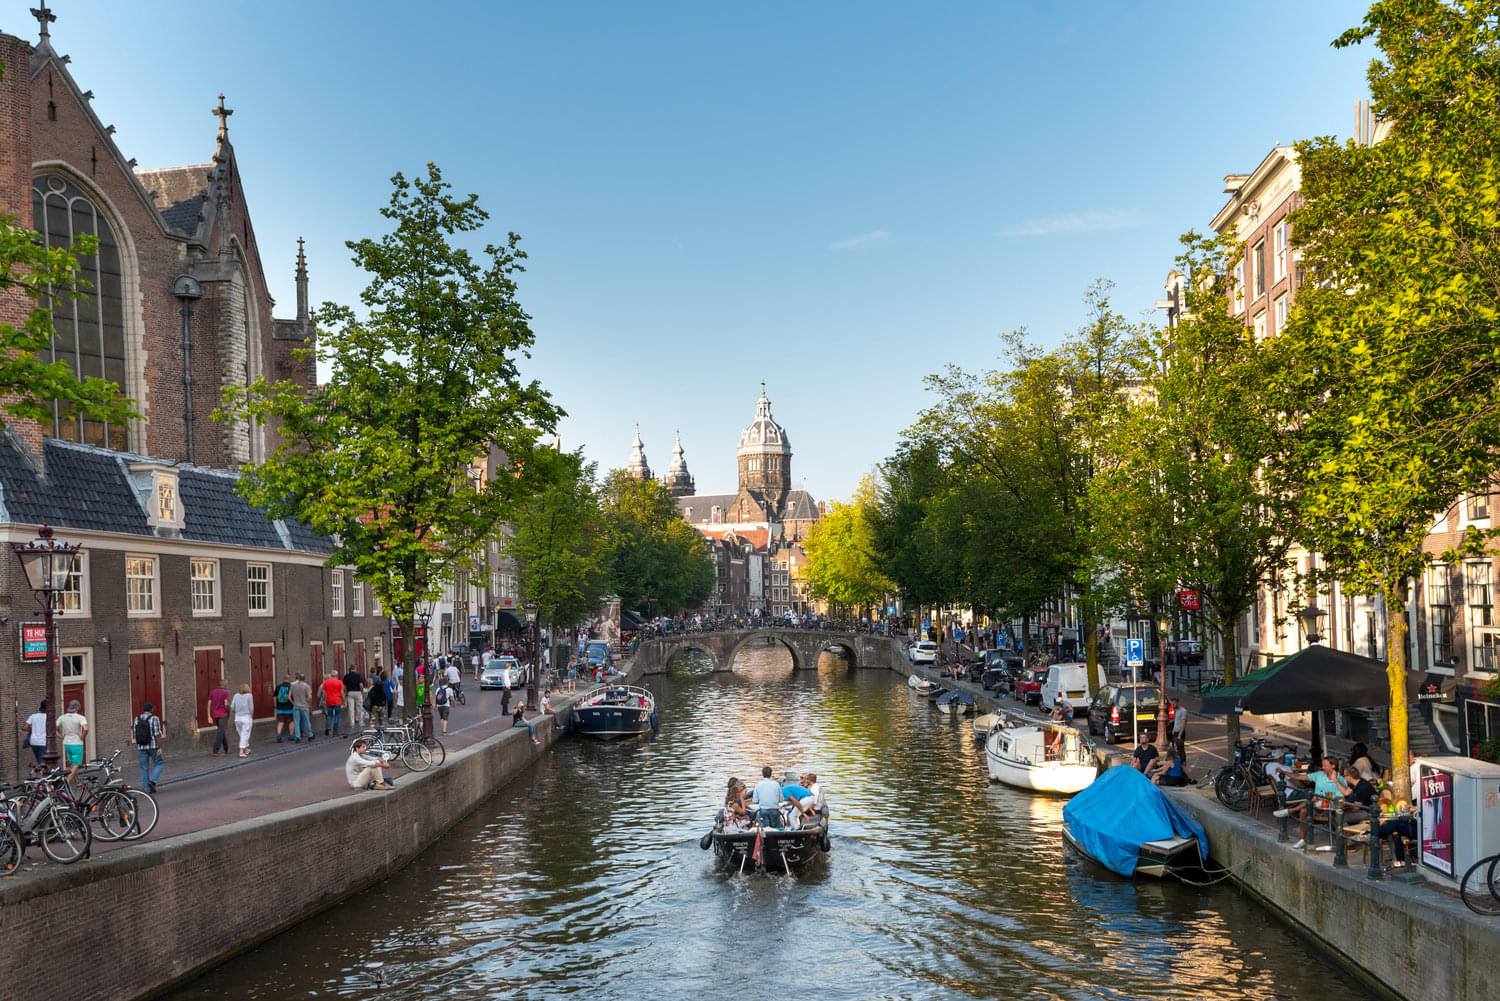 Get mesmerized by the scenic beauty of Amsterdam